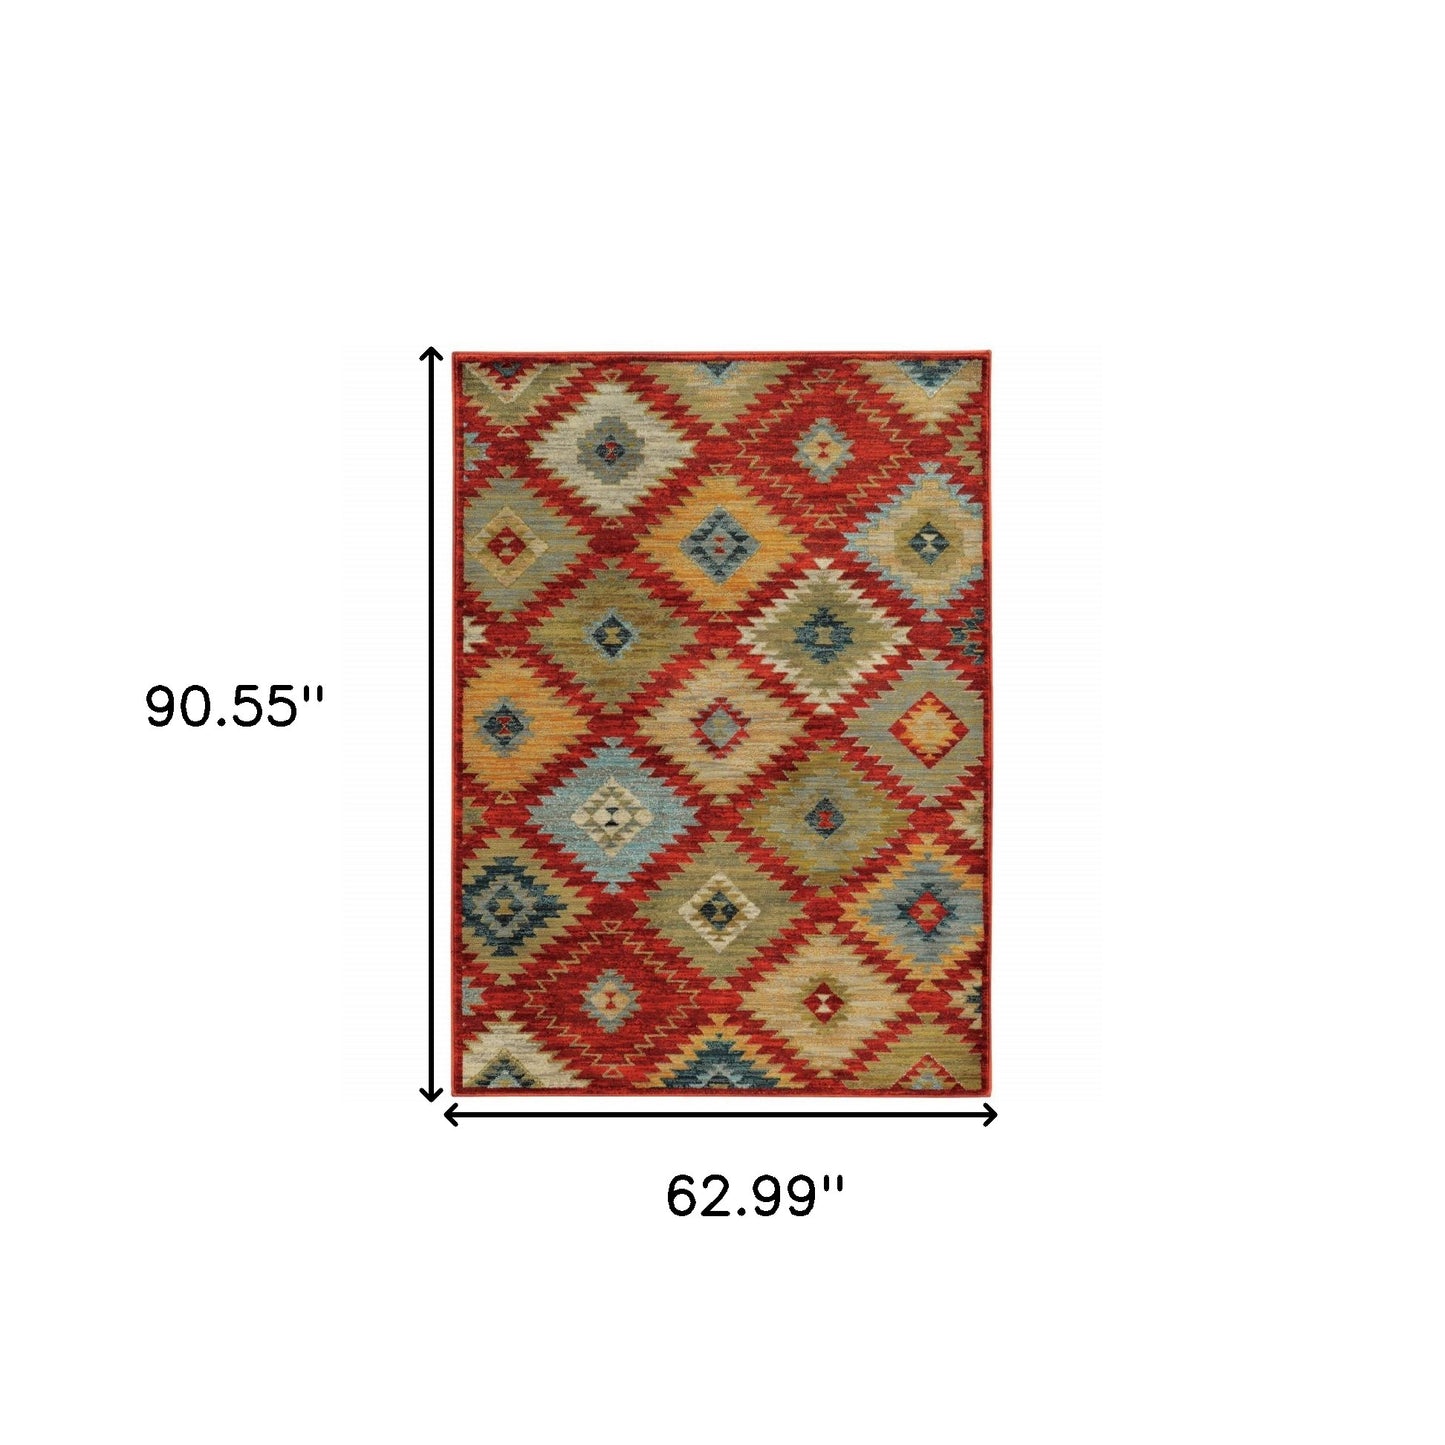 5' X 8' Red Green Gold Blue Teal And Ivory Geometric Power Loom Stain Resistant Area Rug